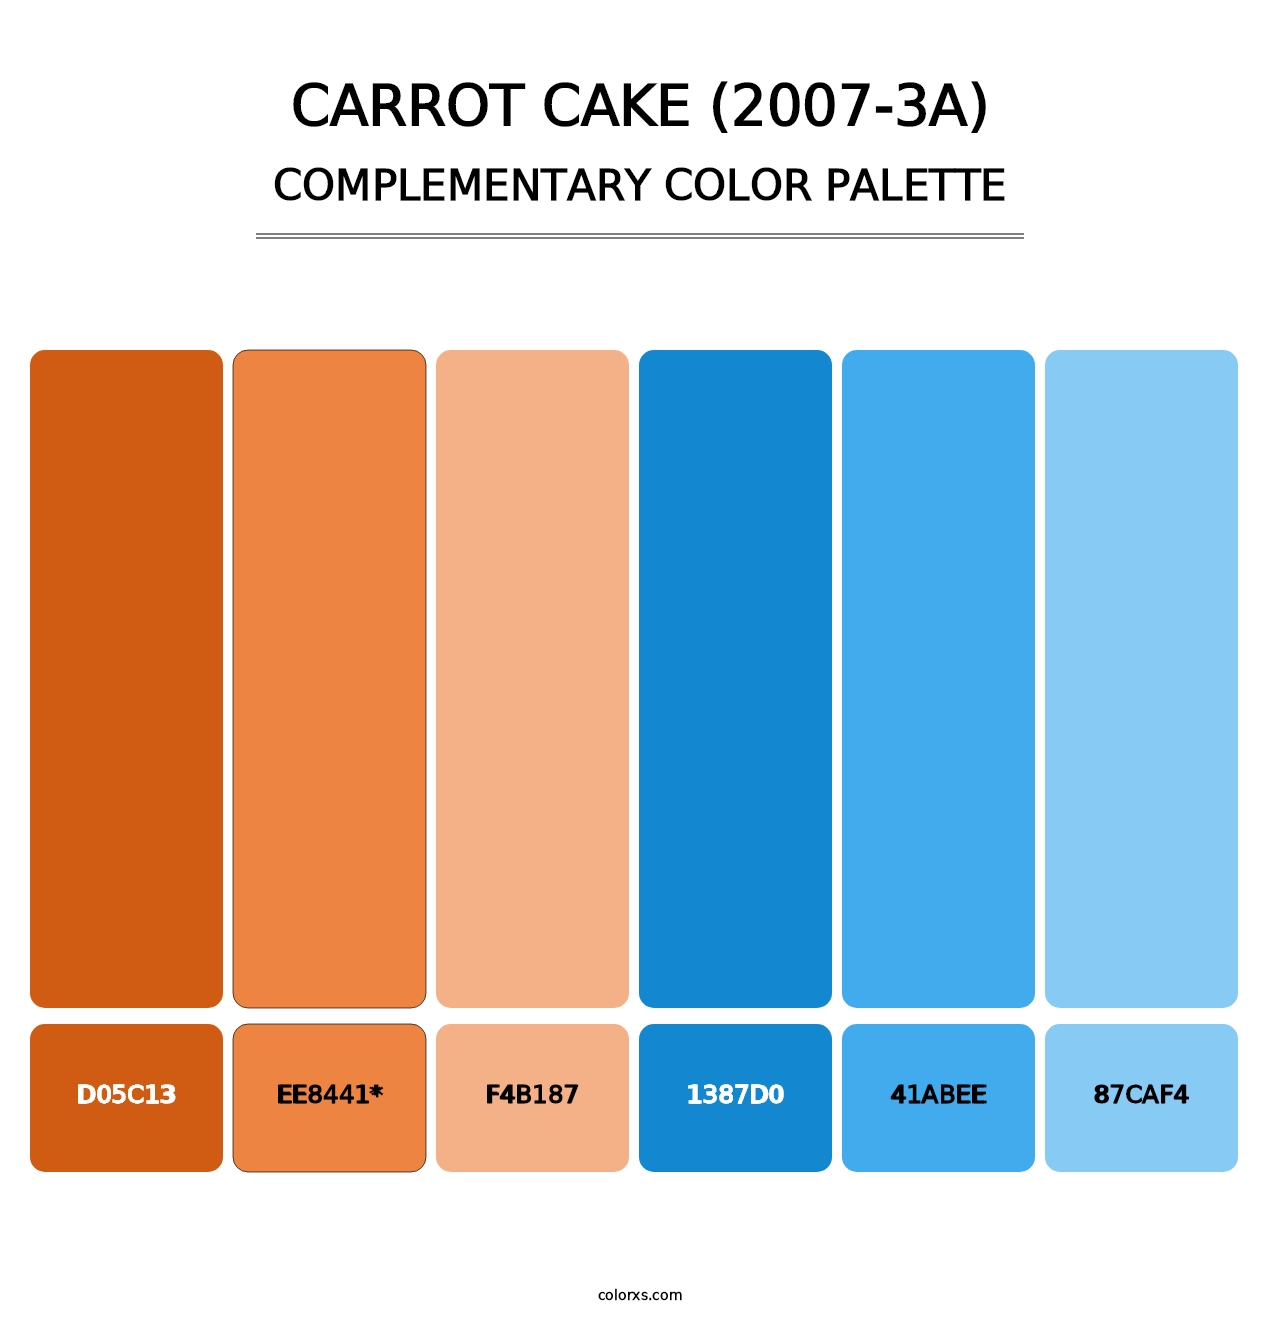 Carrot Cake (2007-3A) - Complementary Color Palette